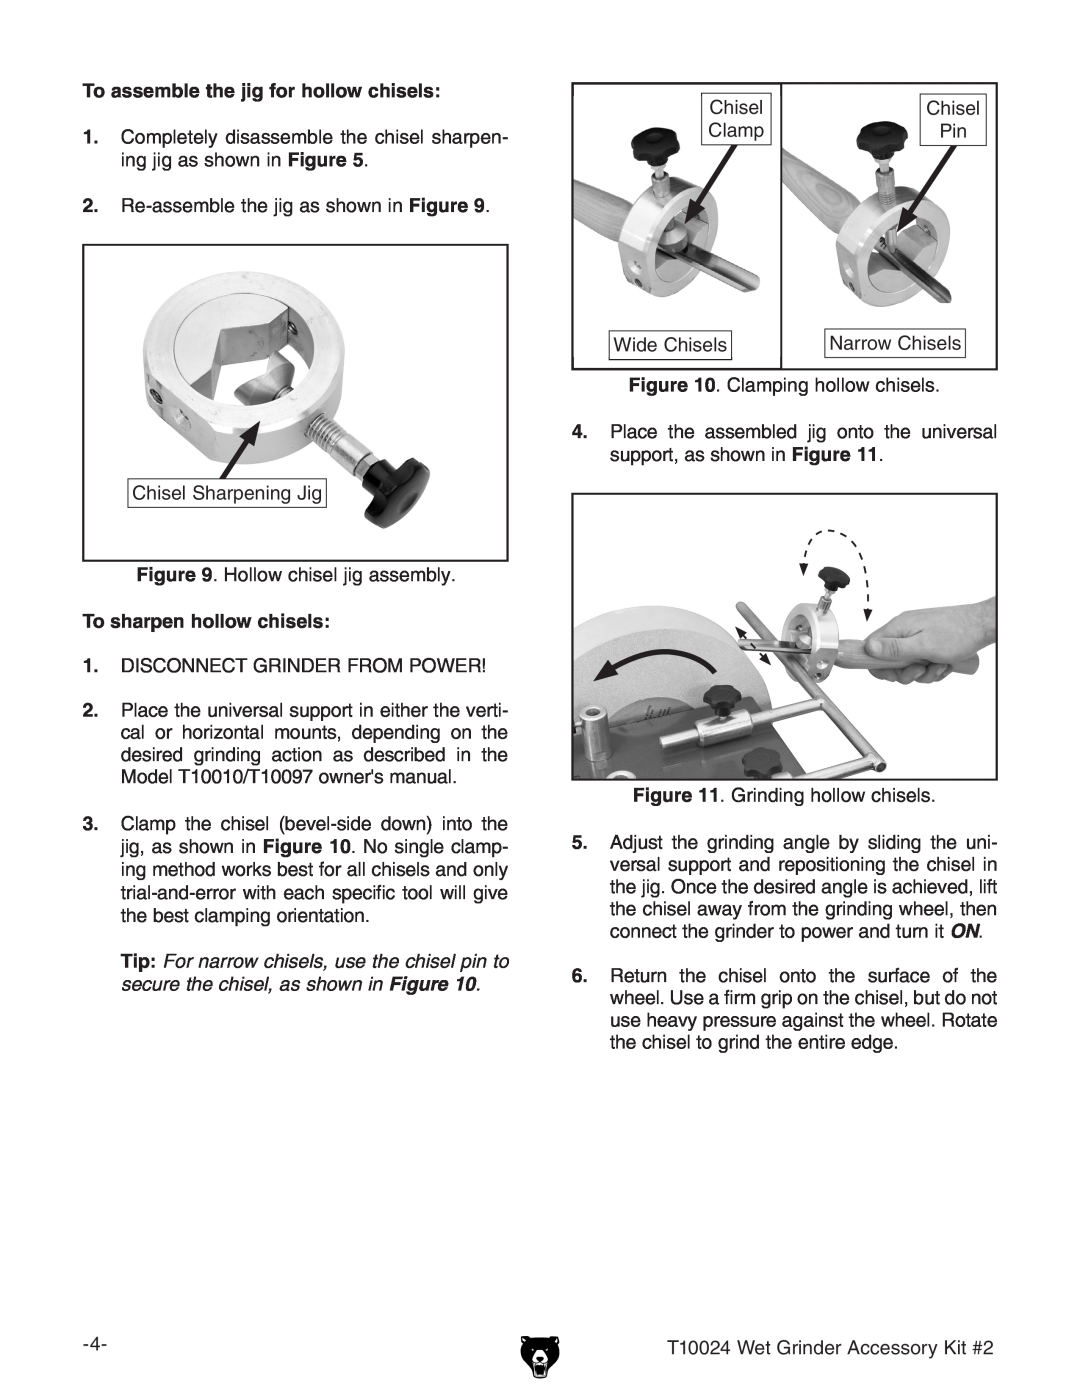 Grizzly T10024 instruction sheet To assemble the jig for hollow chisels, To sharpen hollow chisels 